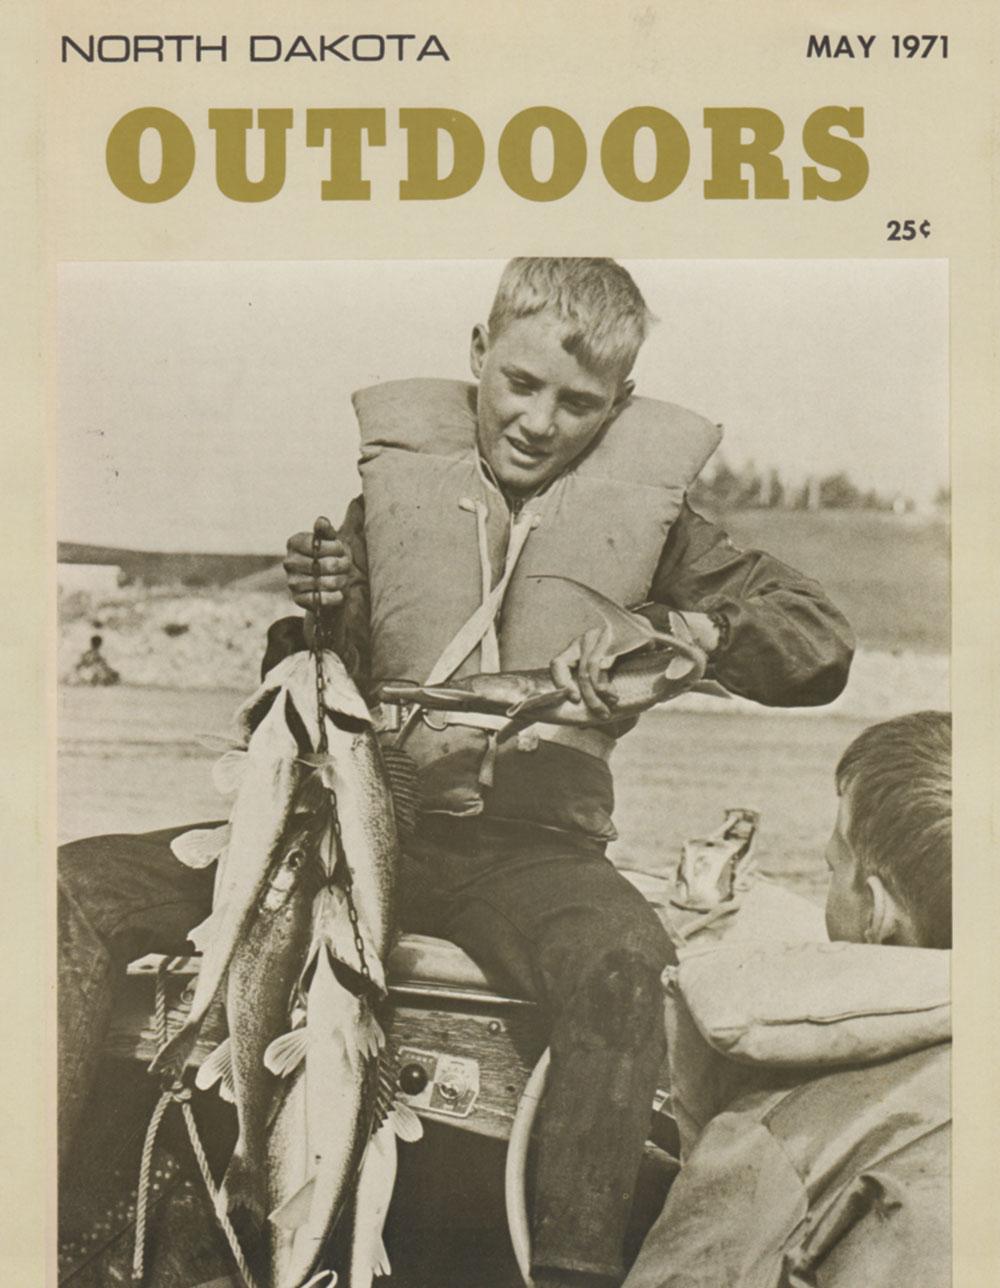 Cover of North Dakota Outdoors for the month of May 1971